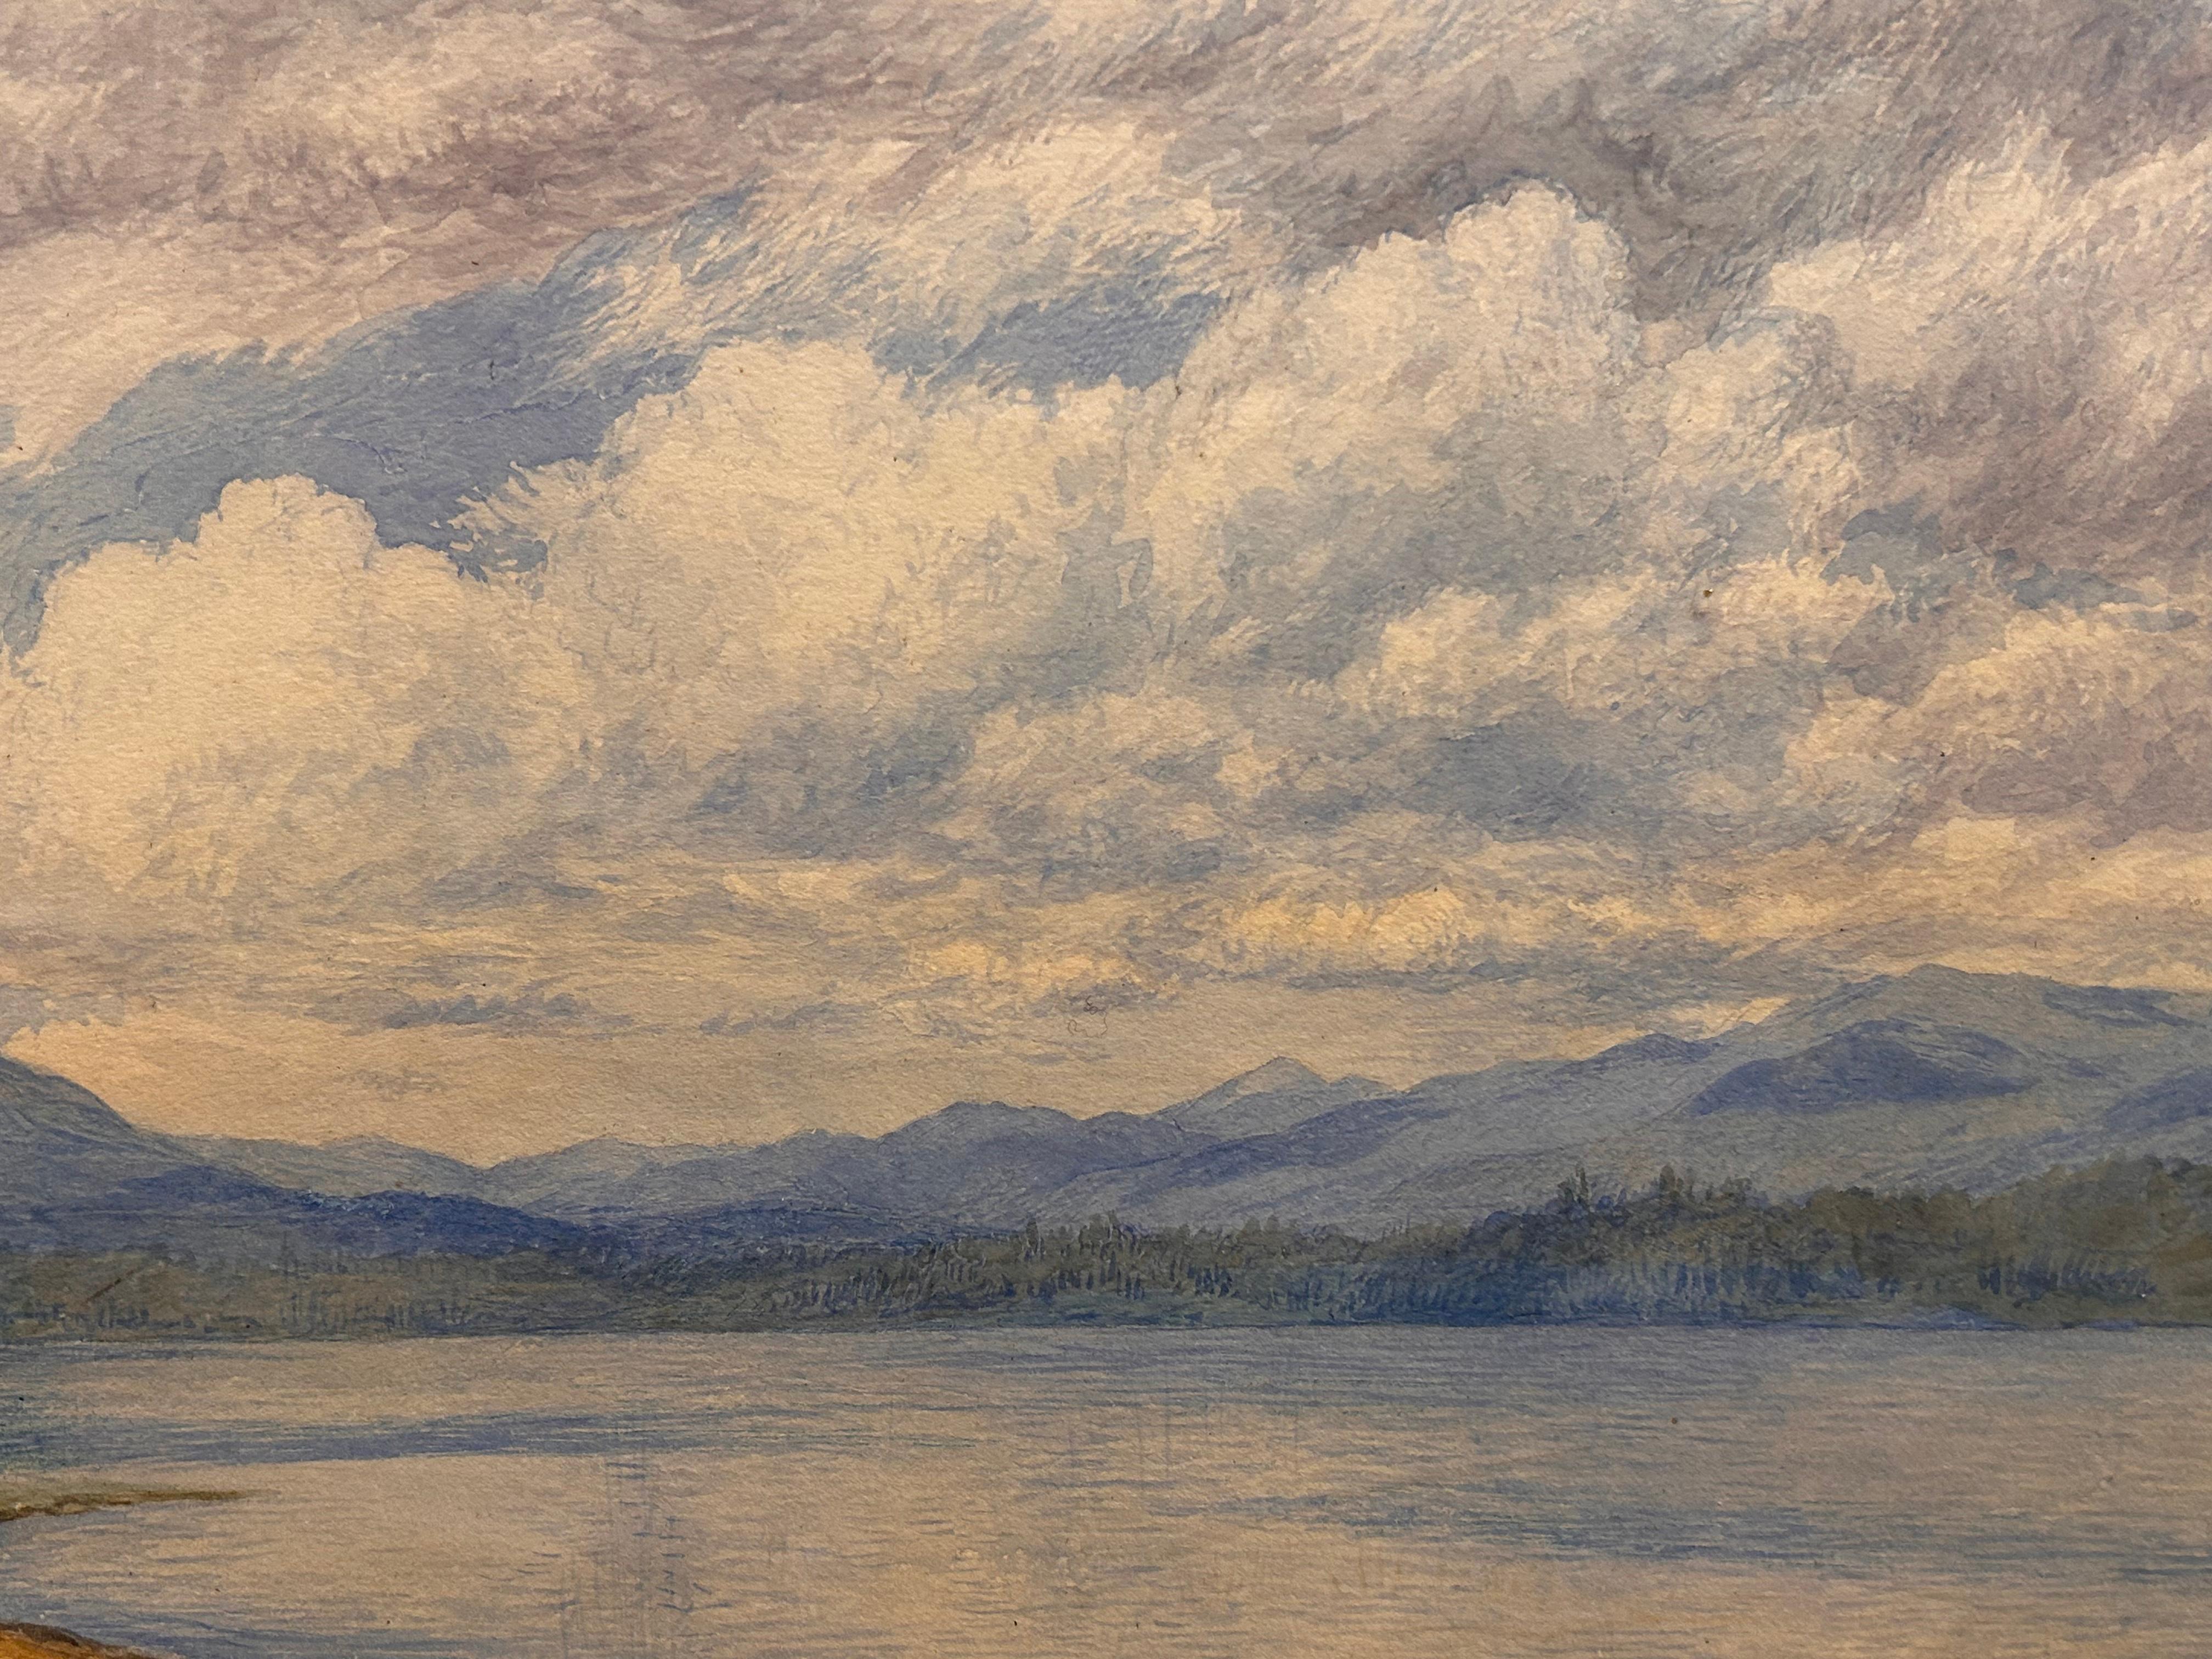 Landscape of Summer At Lake George, NY - Pre-Raphaelite Painting by John Henry Hill